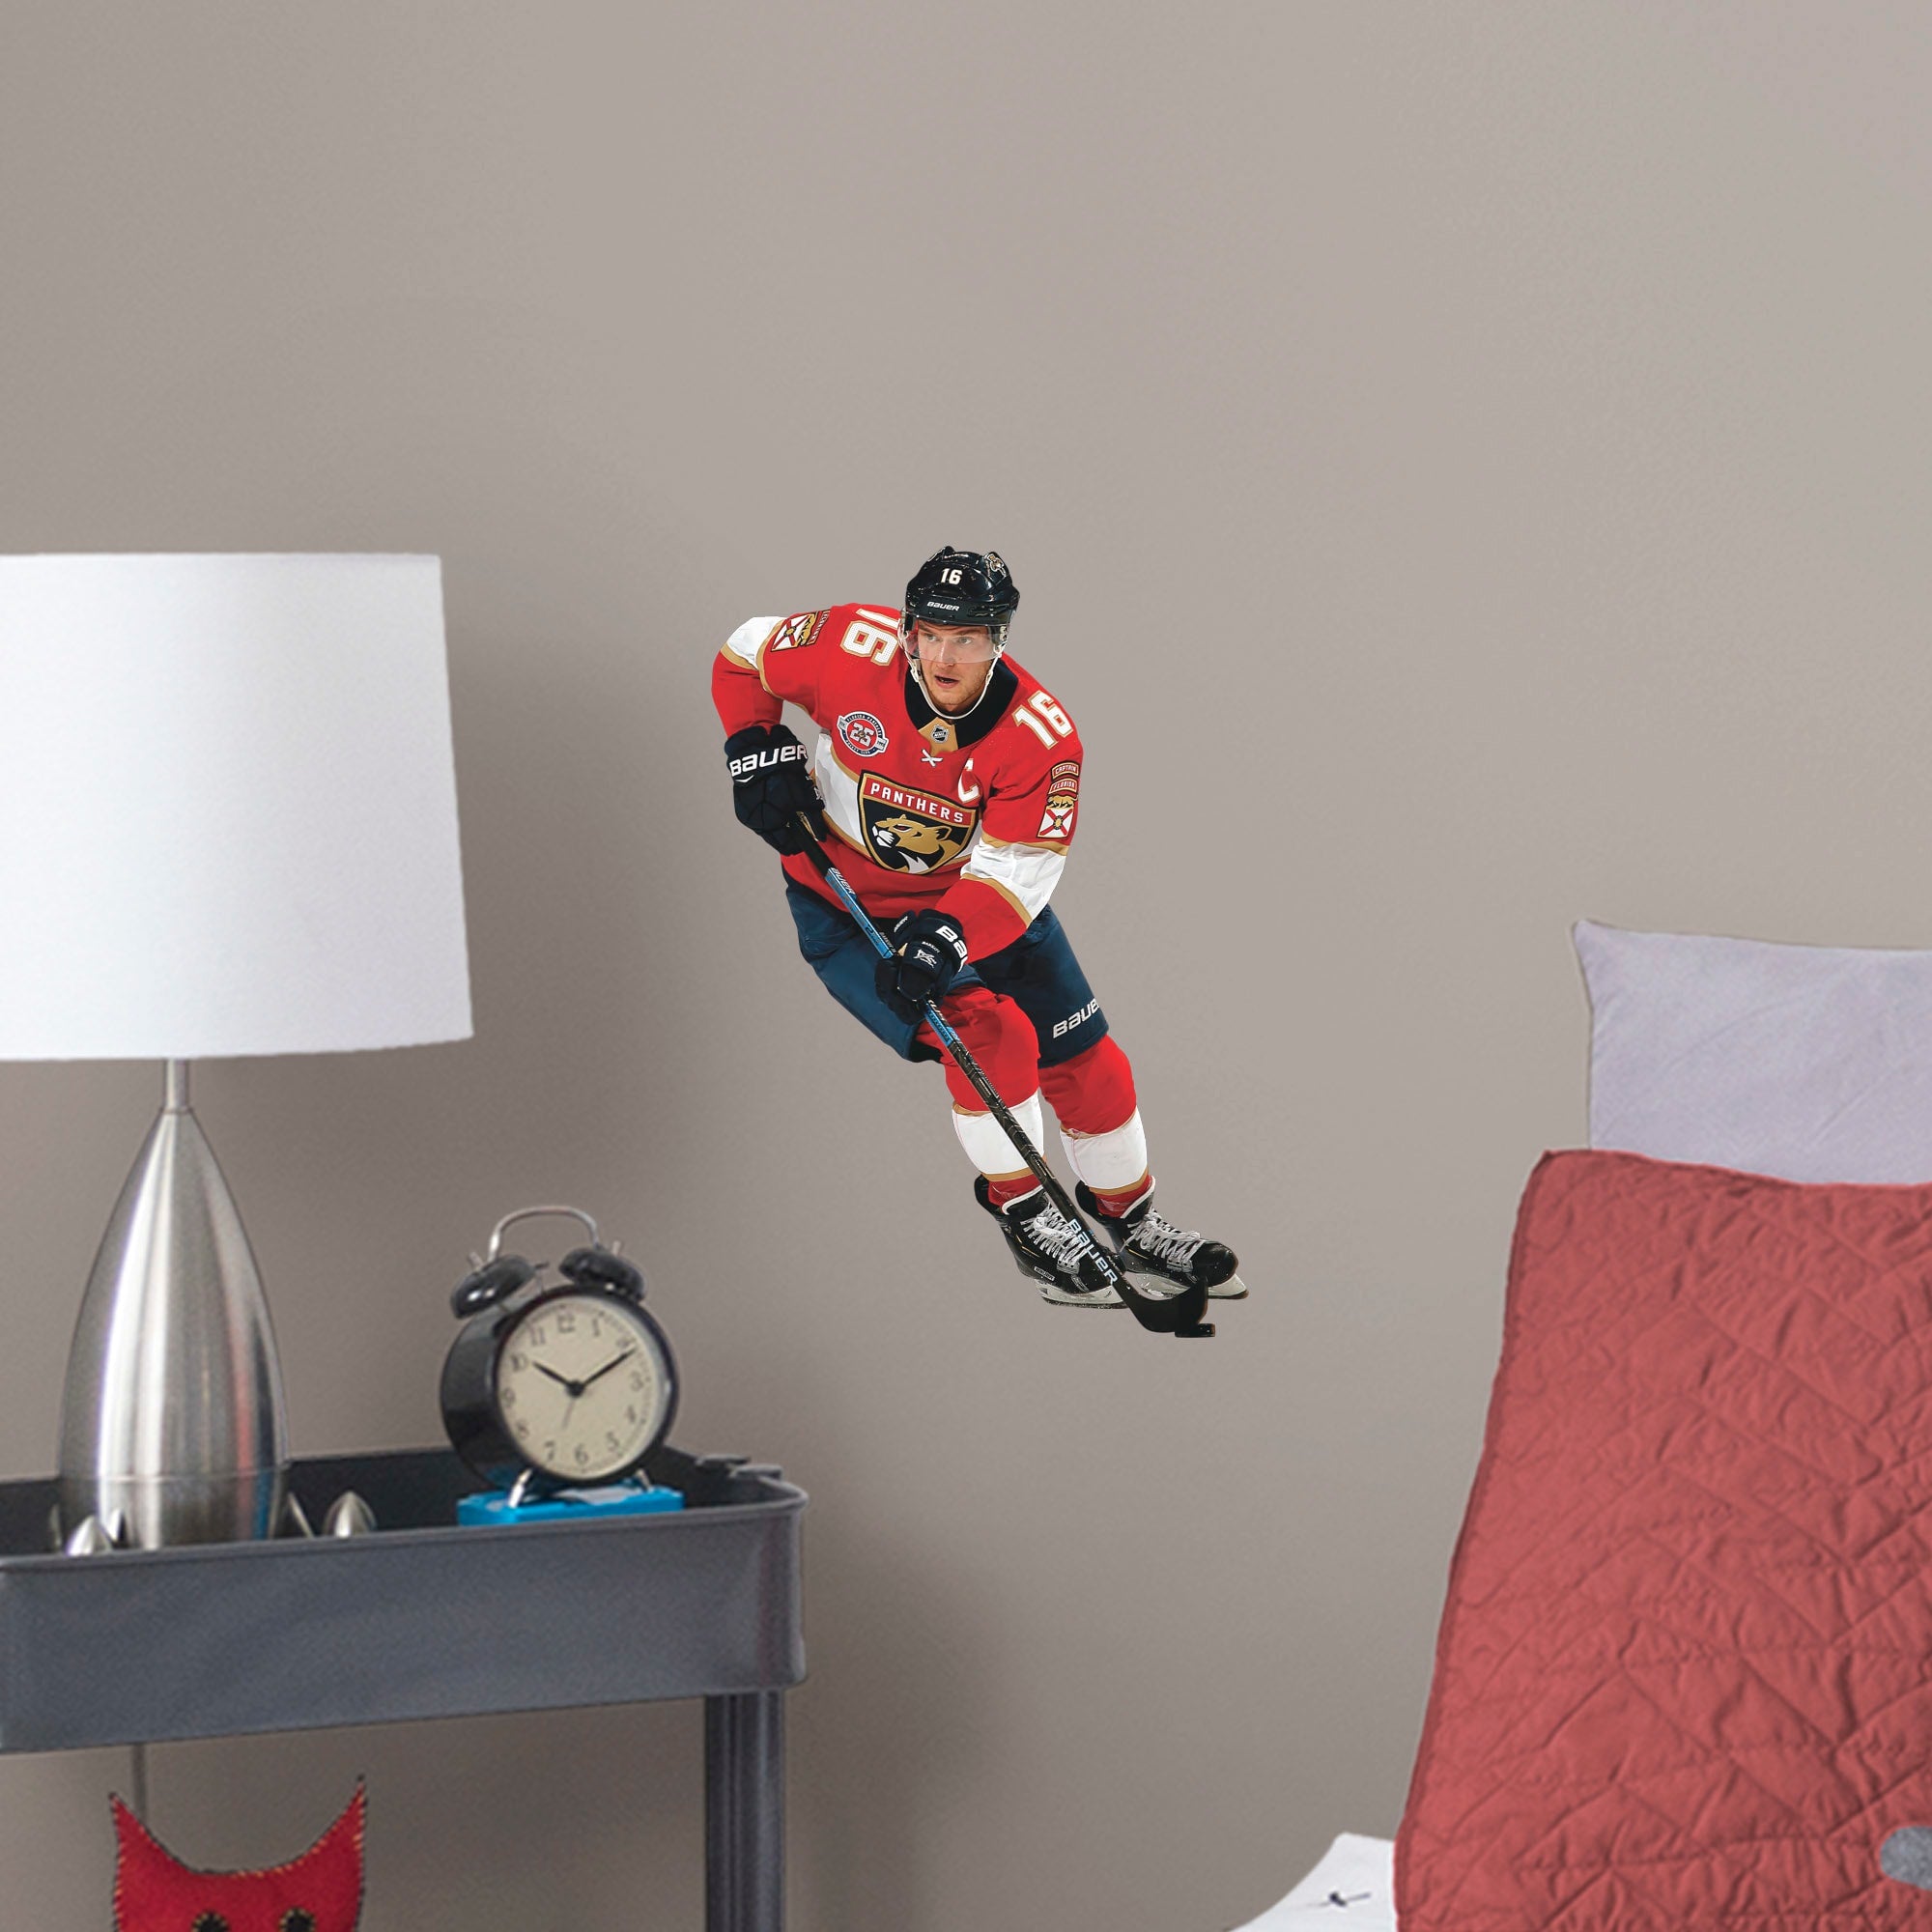 Aleksander Barkov for Florida Panthers - Officially Licensed NHL Removable Wall Decal Large by Fathead | Vinyl